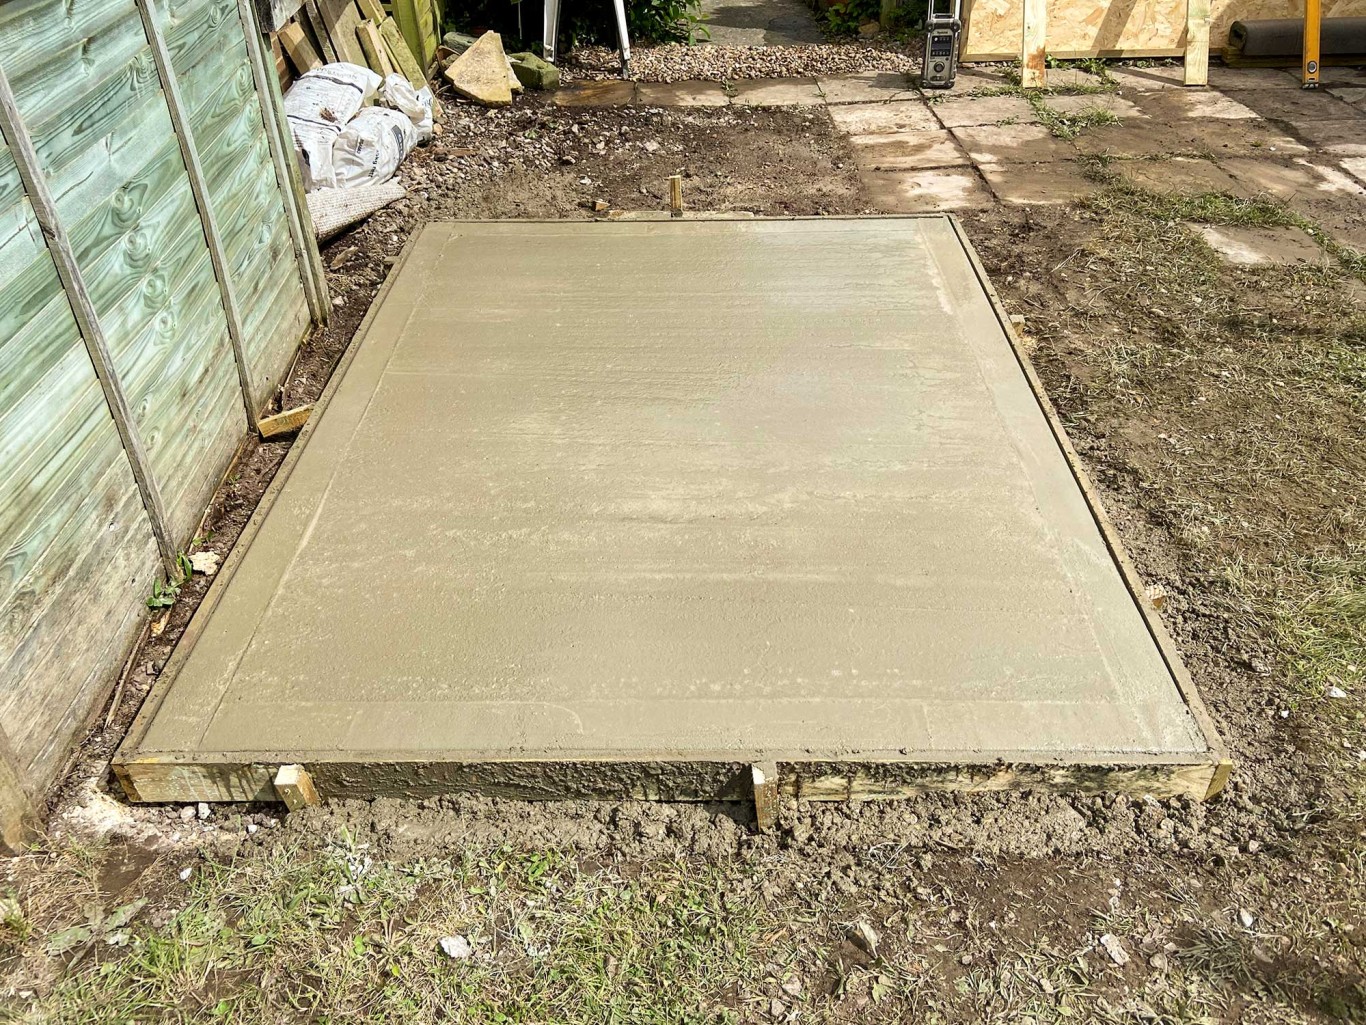 Completed shed concrete base.